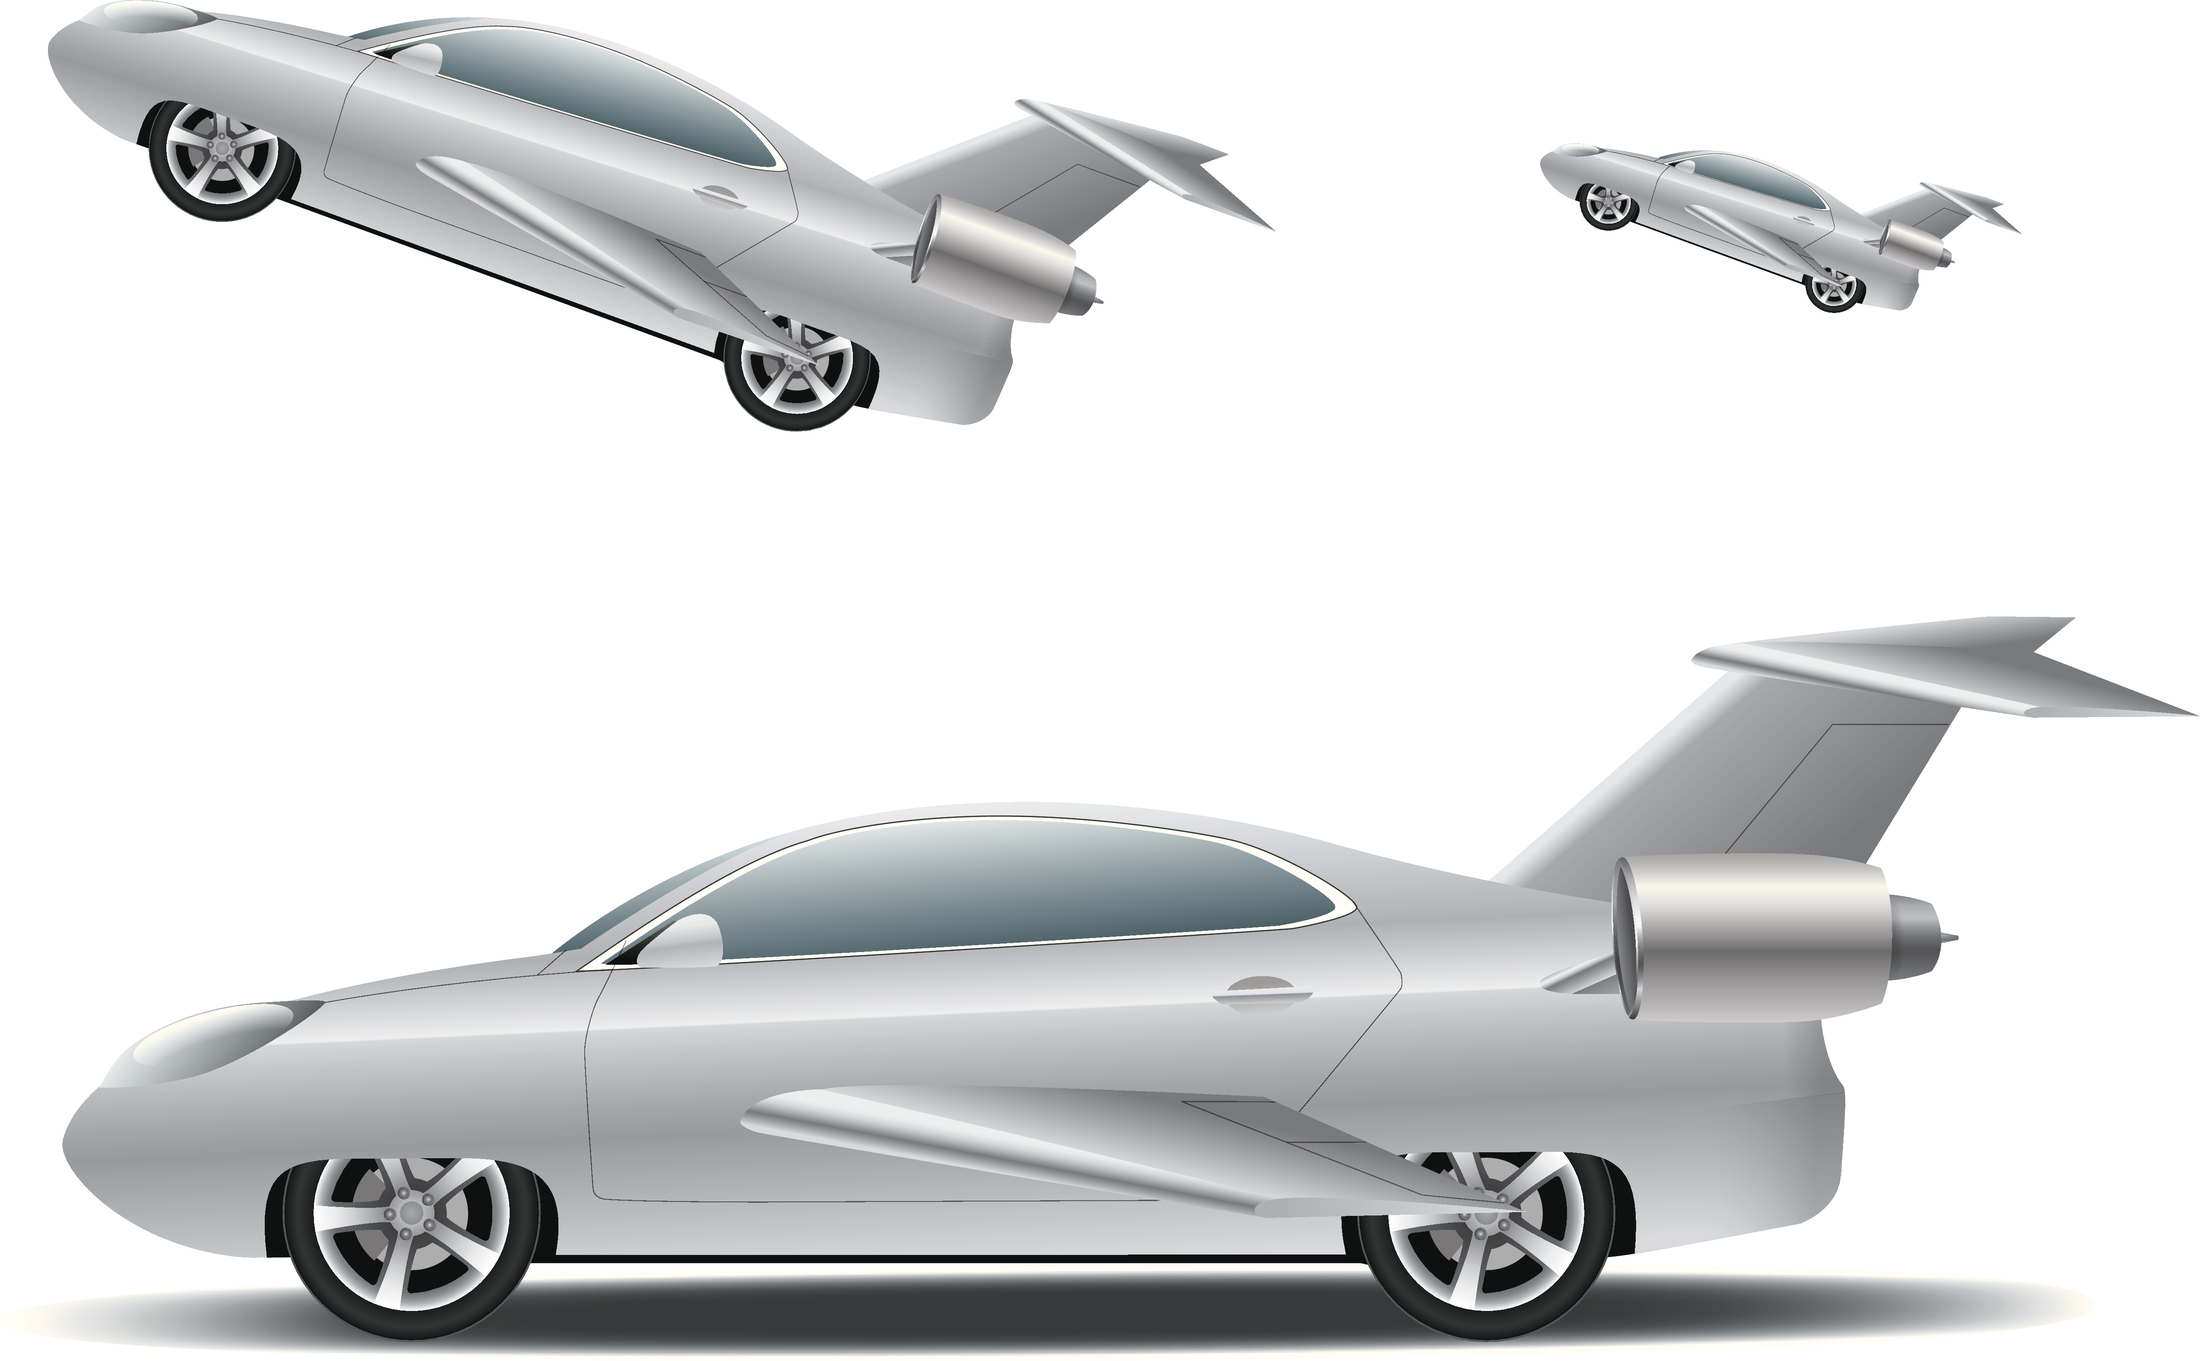 Flying High - The Role of the Cleanroom in the Development of Flying Cars - Cleanroom News ...